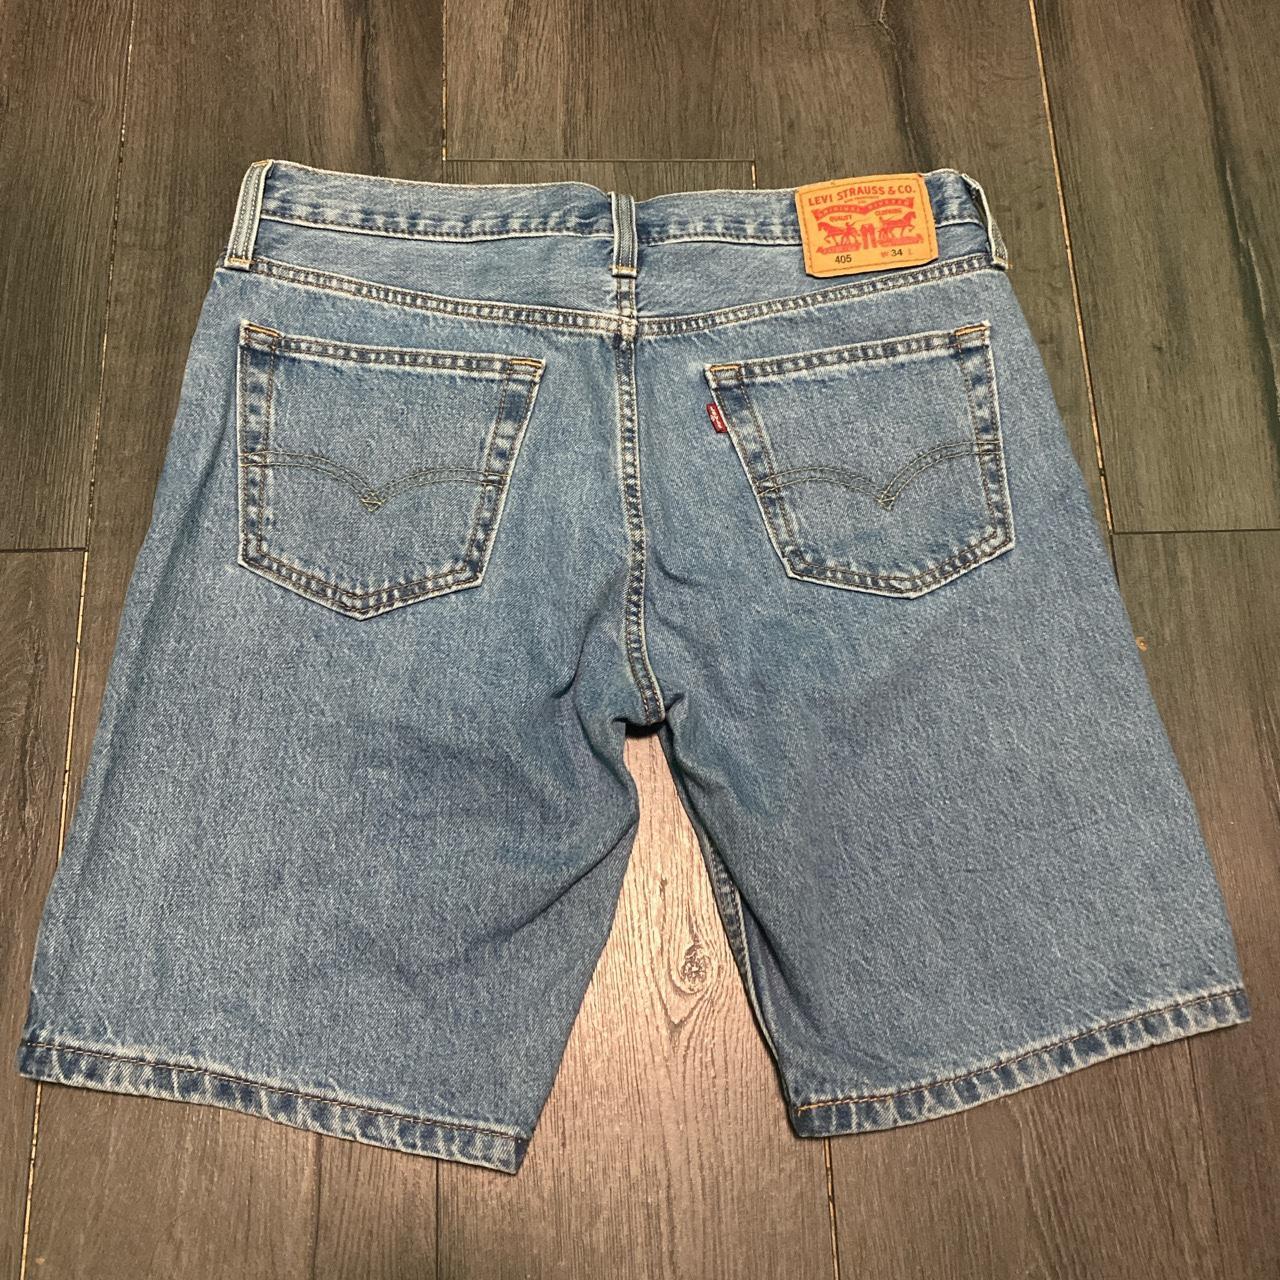 LEVIS 405 JORTS BAGGY FIT. These are some nice jorts... - Depop